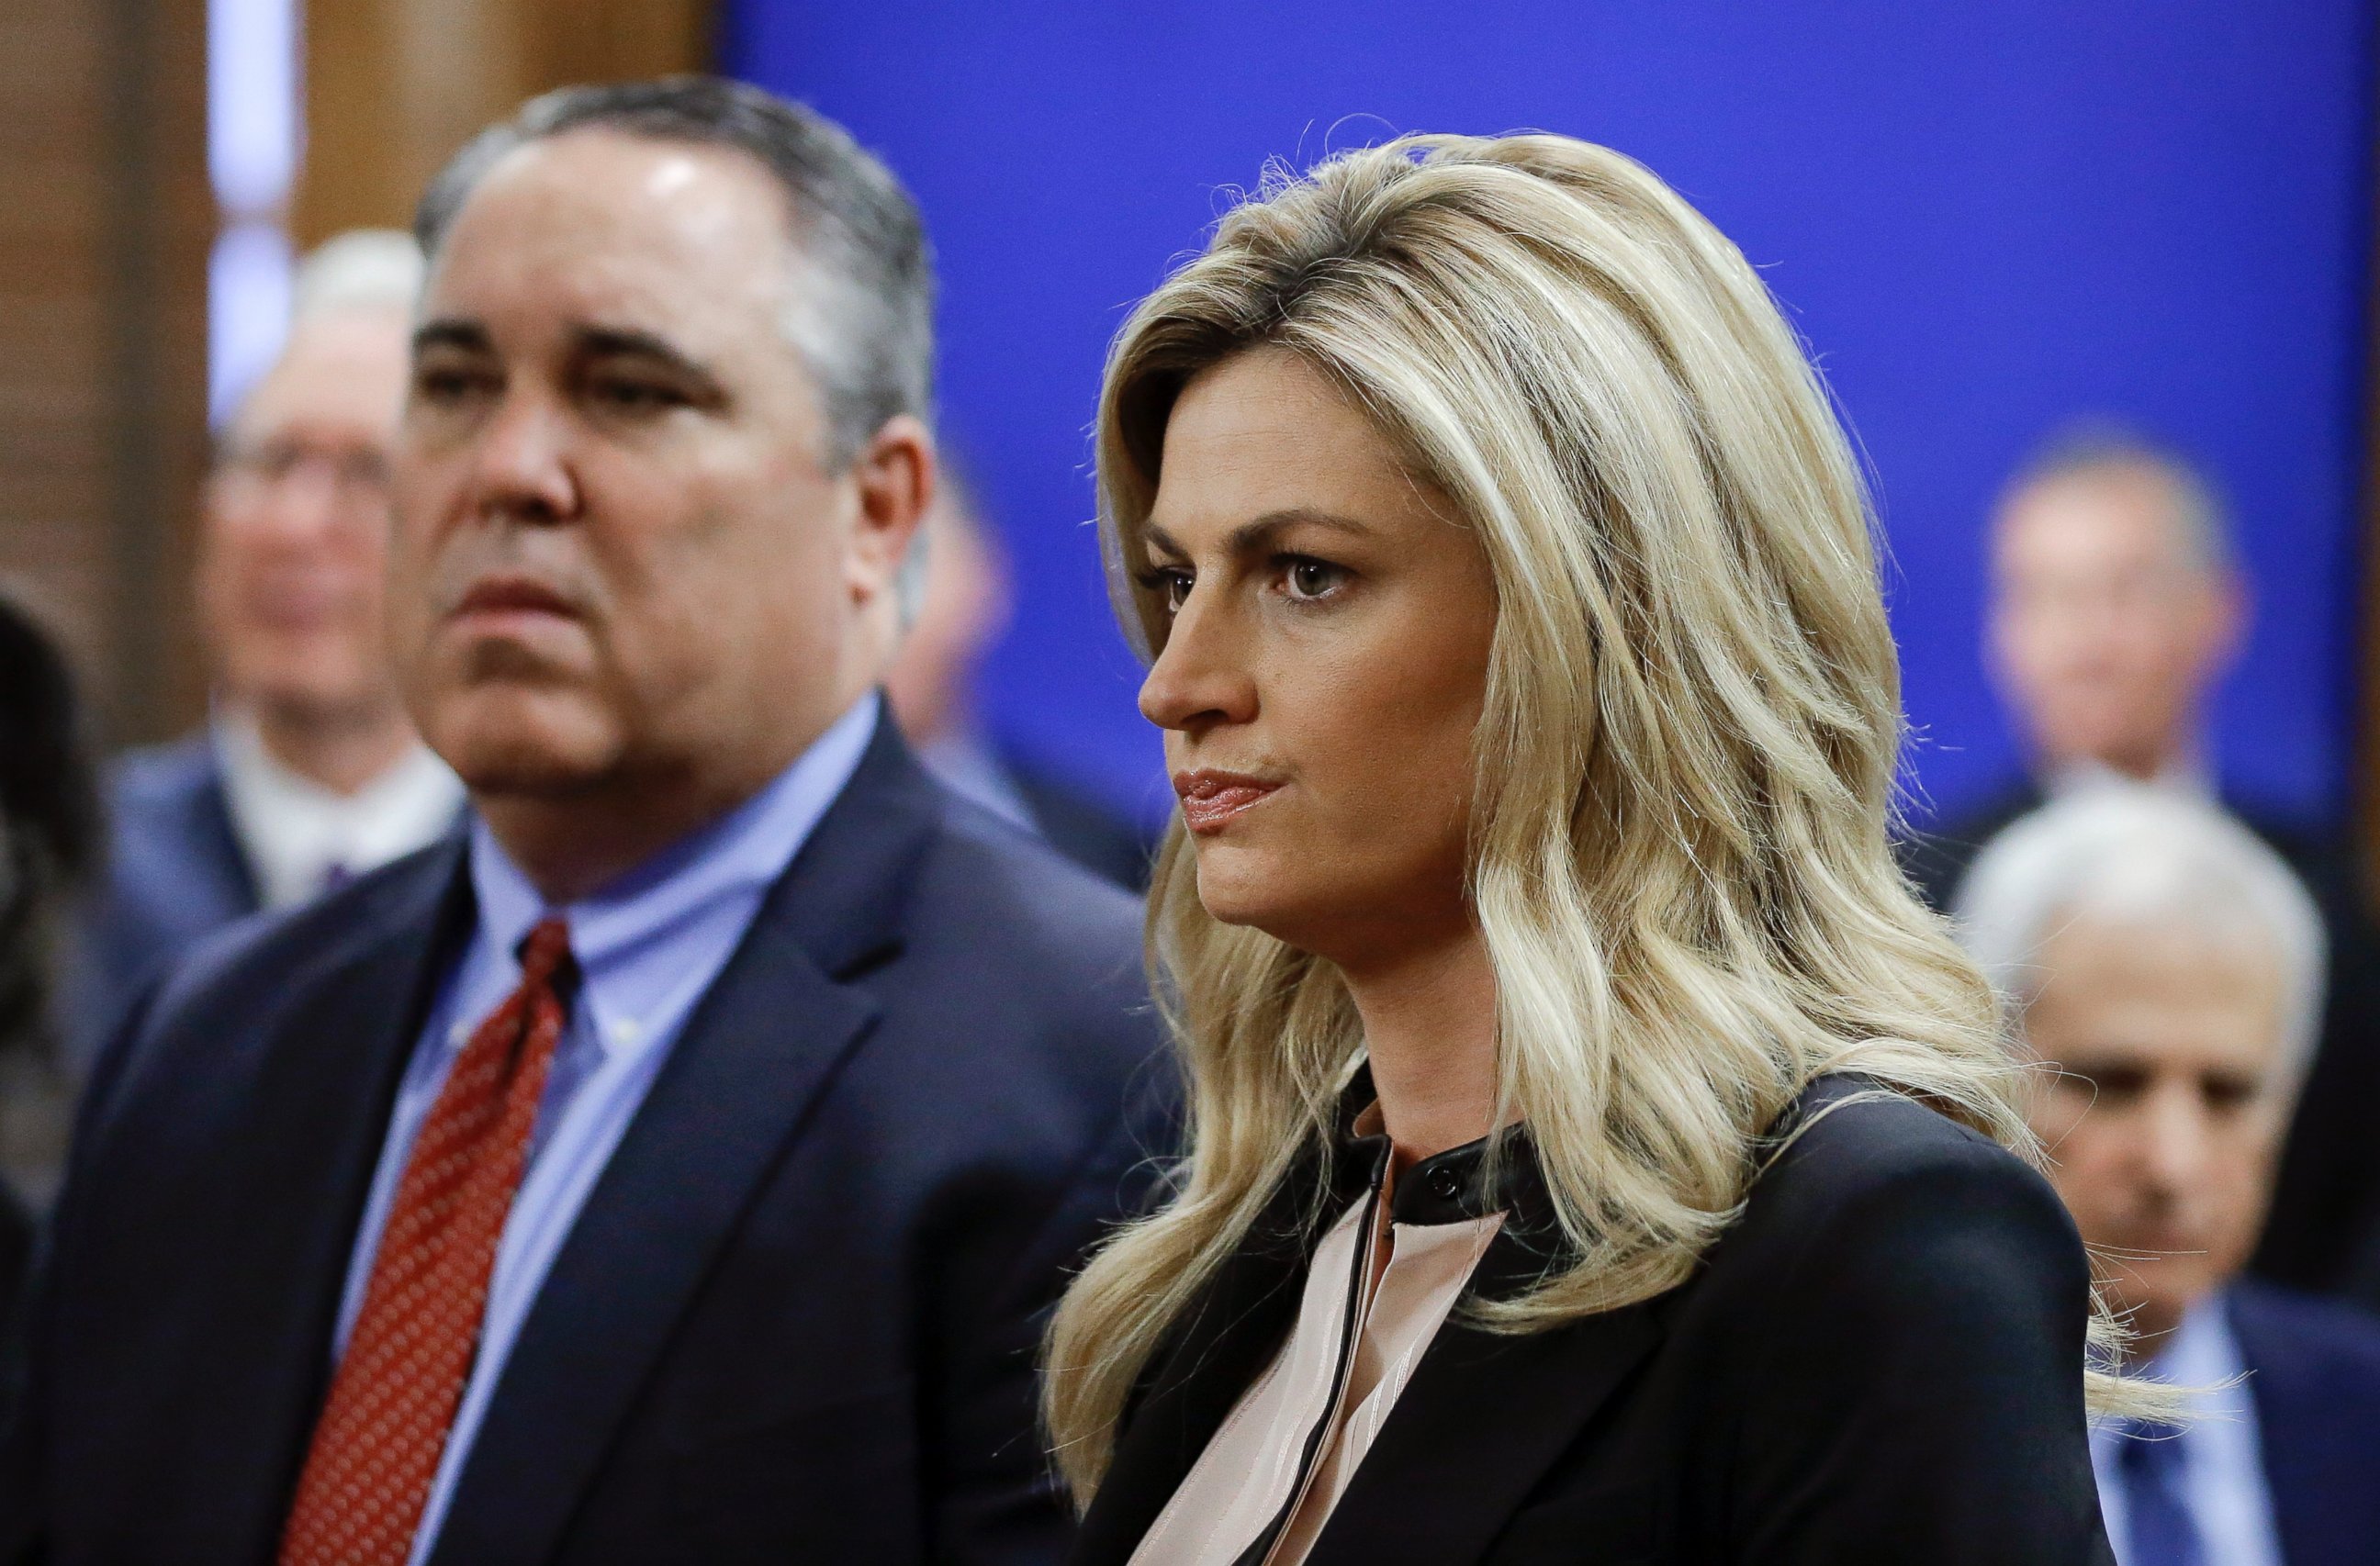 PHOTO: Sportscaster and television host Erin Andrews, right, stands with attorney Scott Carr, left, as they wait for the jury to enter the courtroom before closing arguments, March 4, 2016, in Nashville, Tenn.